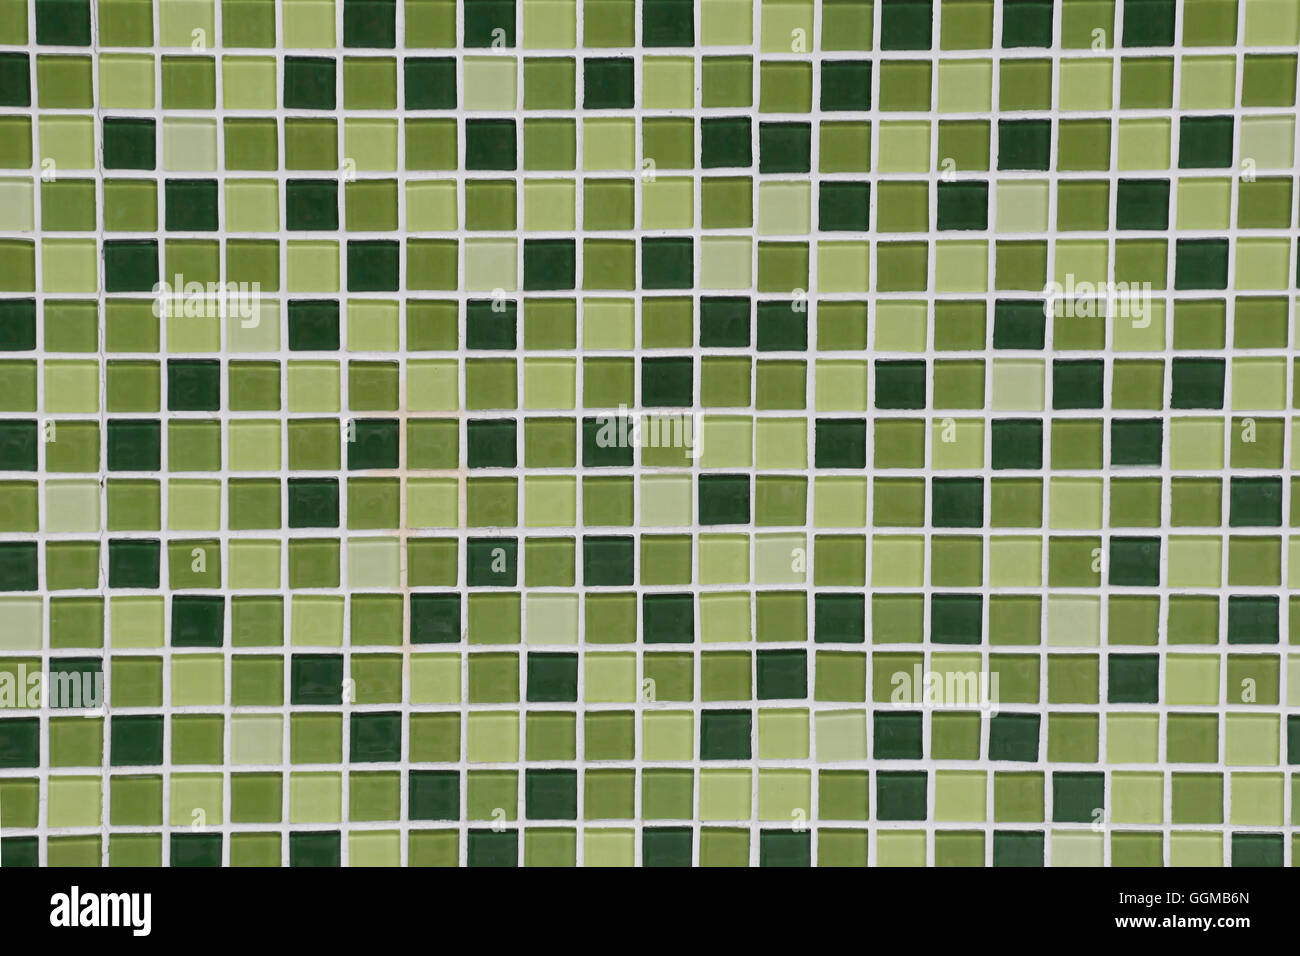 Toilet Wall of made of different hues in green tiles for the design background. Stock Photo